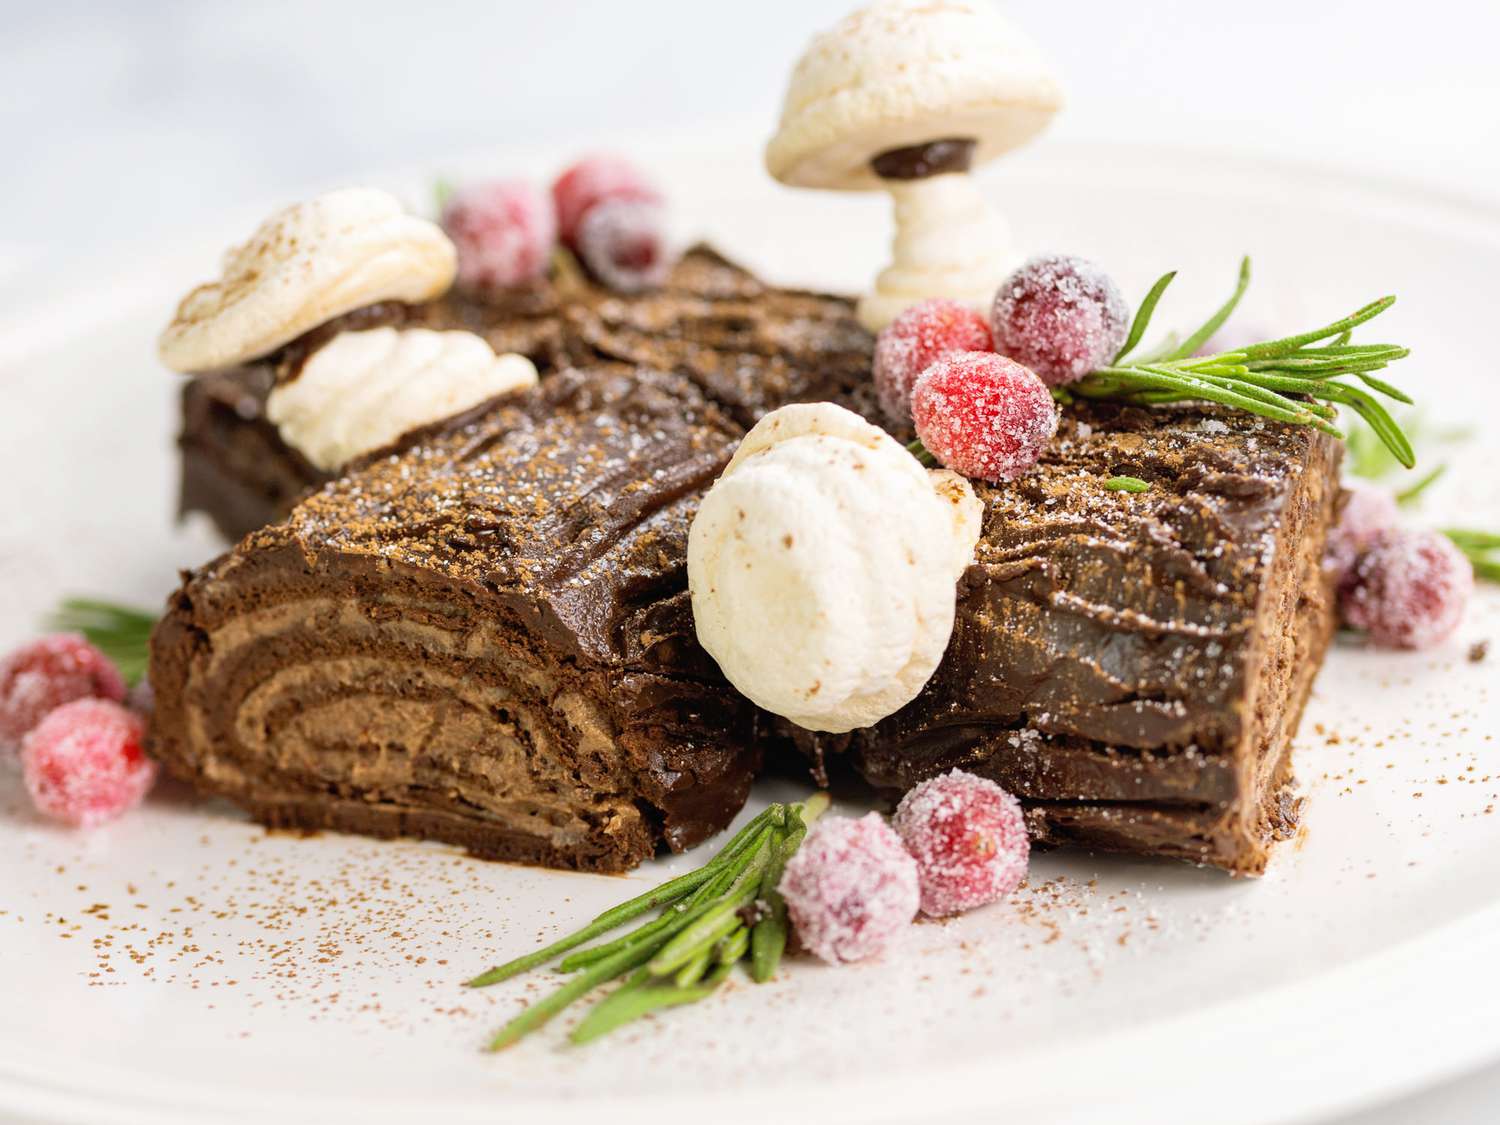 a low angle, close up view of a chocolate yule log topped with meringue mushrooms, sugared cranberries, and rosemary sprigs.